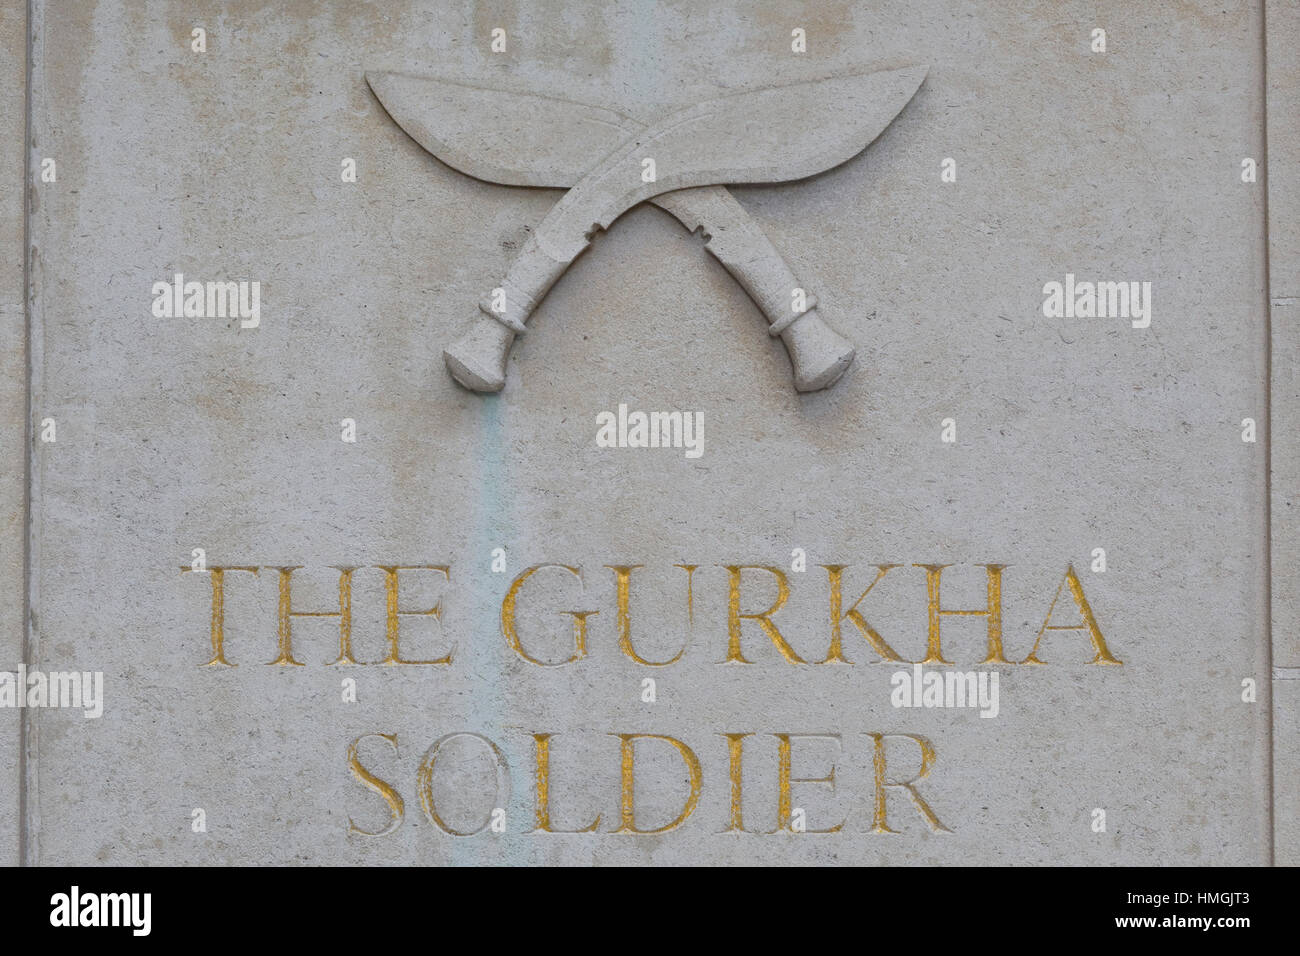 Statue of a Gurkha soldier a tribute to the British Army's Gurkha Regiment, Whitehall London England UK Stock Photo